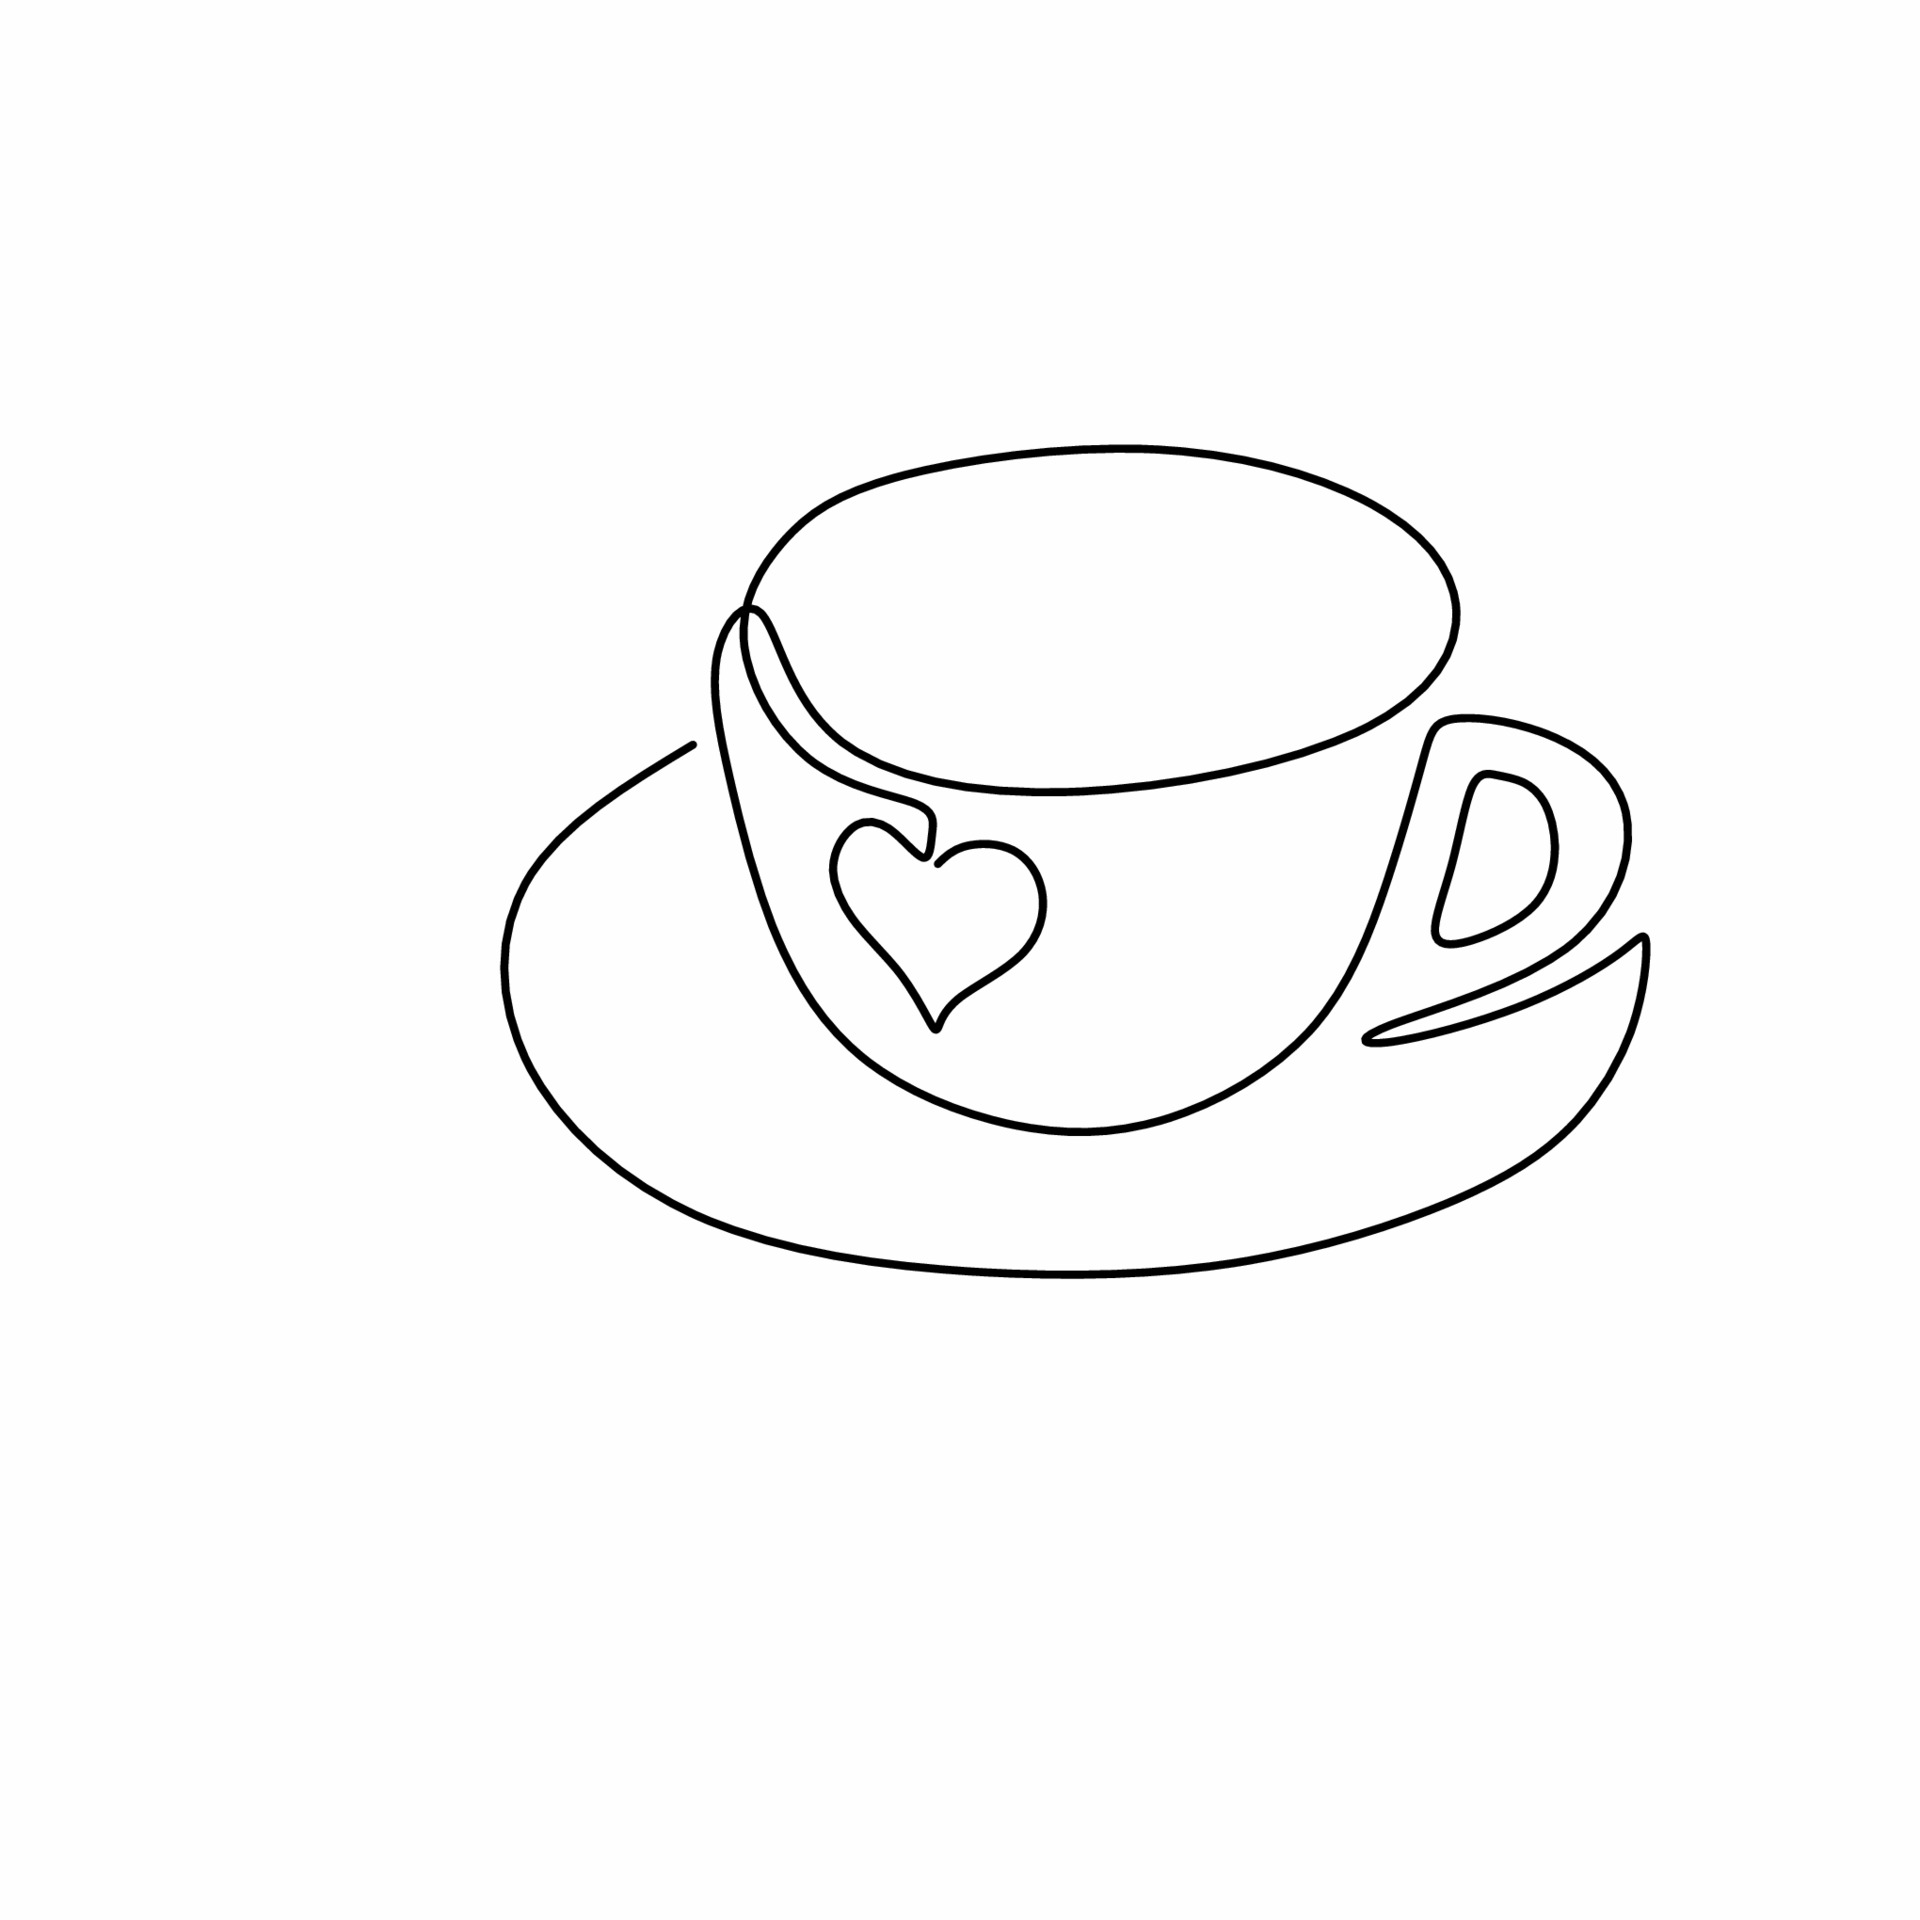 Continuous One Line Art Drawing Of Coffee Warm A Cup Of Coffee With Love Sign Isolated On White Background Coffee Cup Shop Concept Coffee Addict Minimalism Design Vector Illustration Vector Art